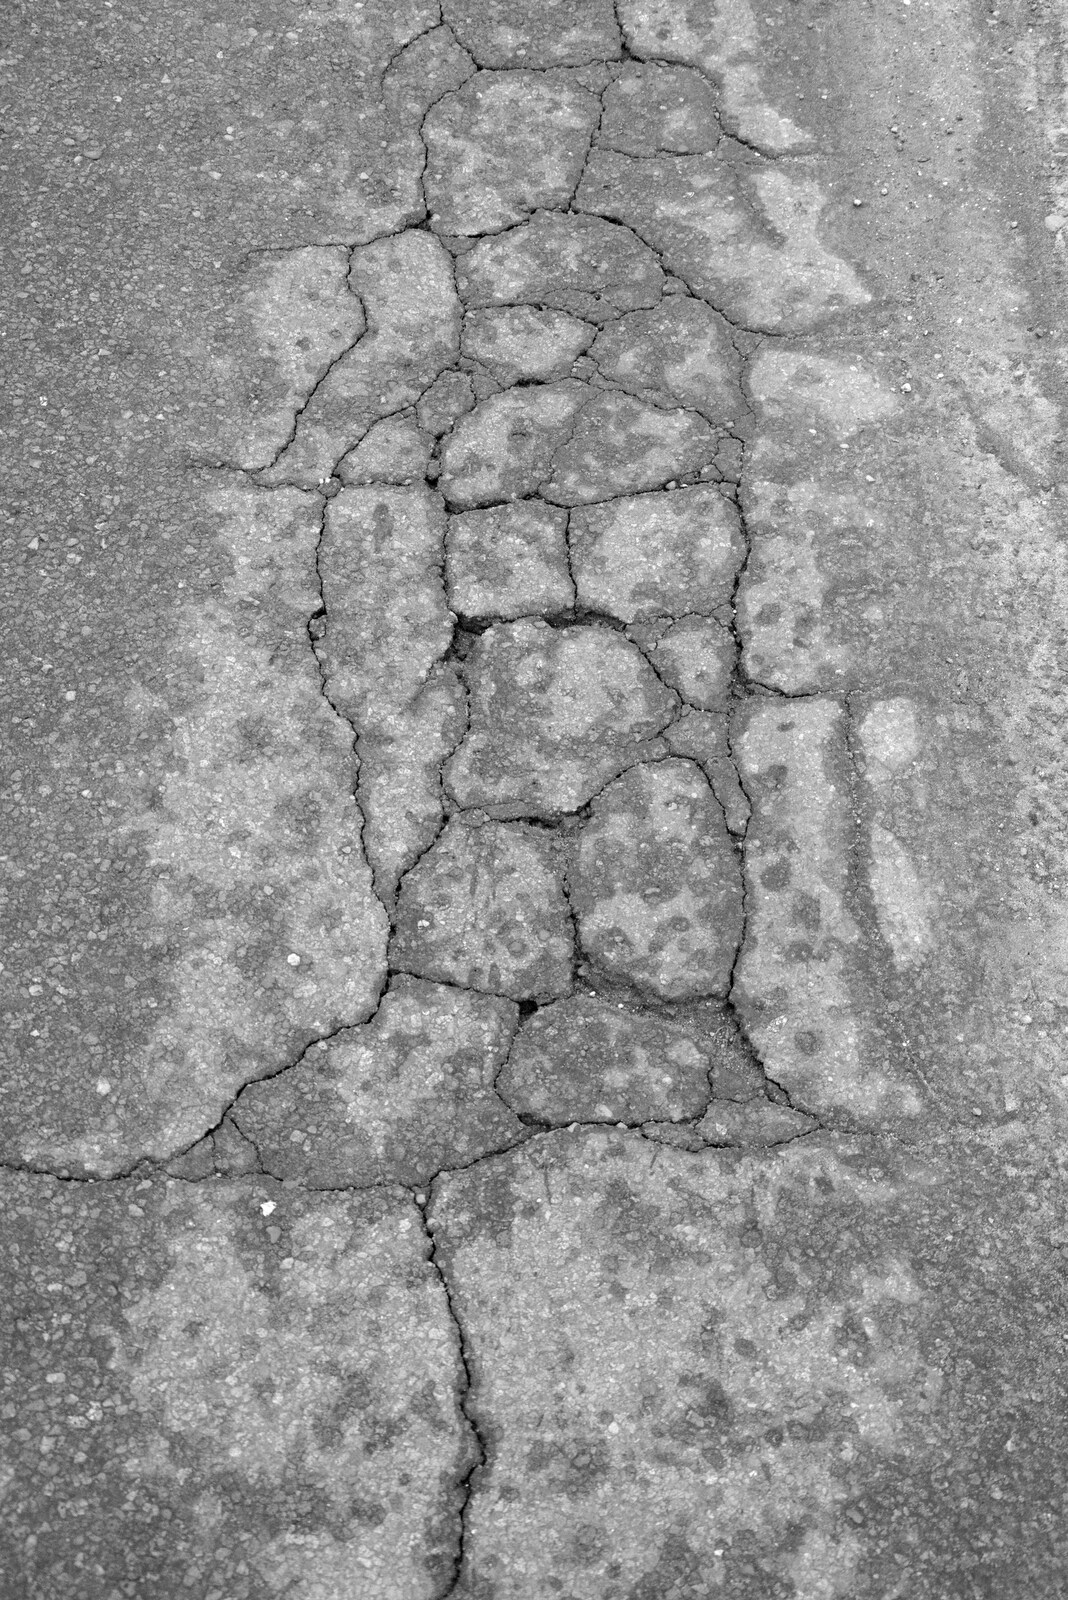 Cracked tarmac from New Year's Day on the Ling, Wortham, Suffolk - 1st January 2020